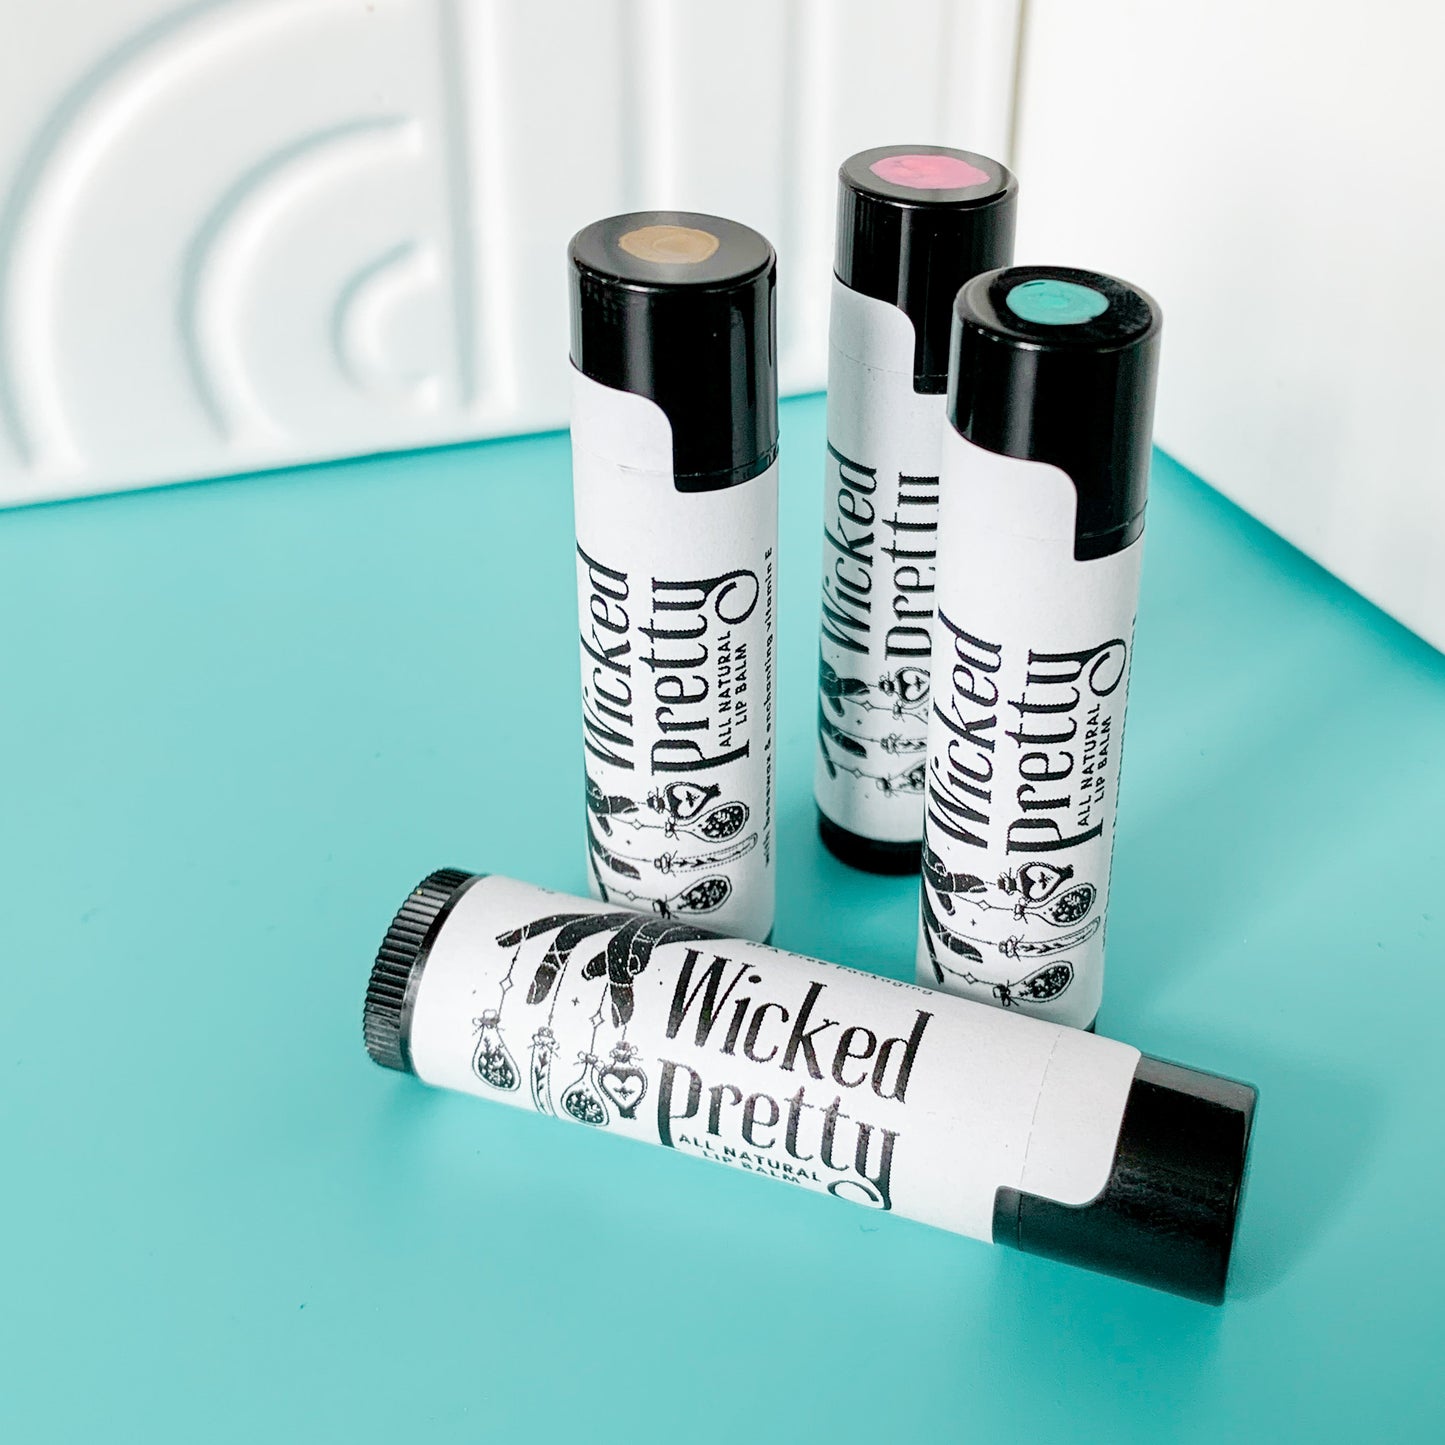 1-Pack Wicked Pretty Lip Balm - Untinted